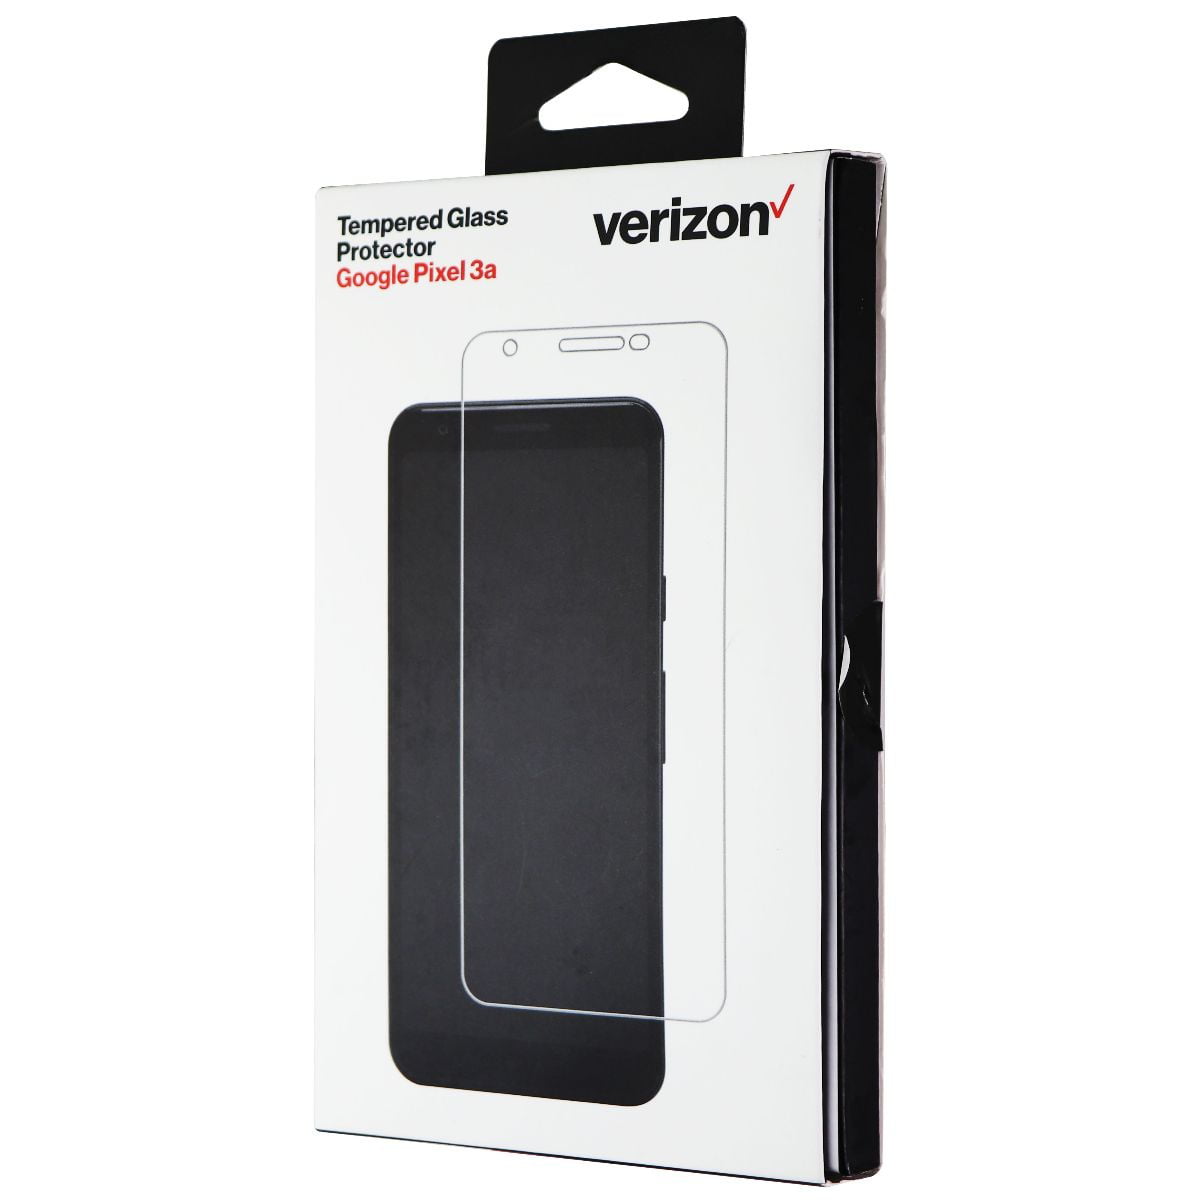 Verizon Tempered Glass Display Screen Protector for Google Pixel 3a - Clear